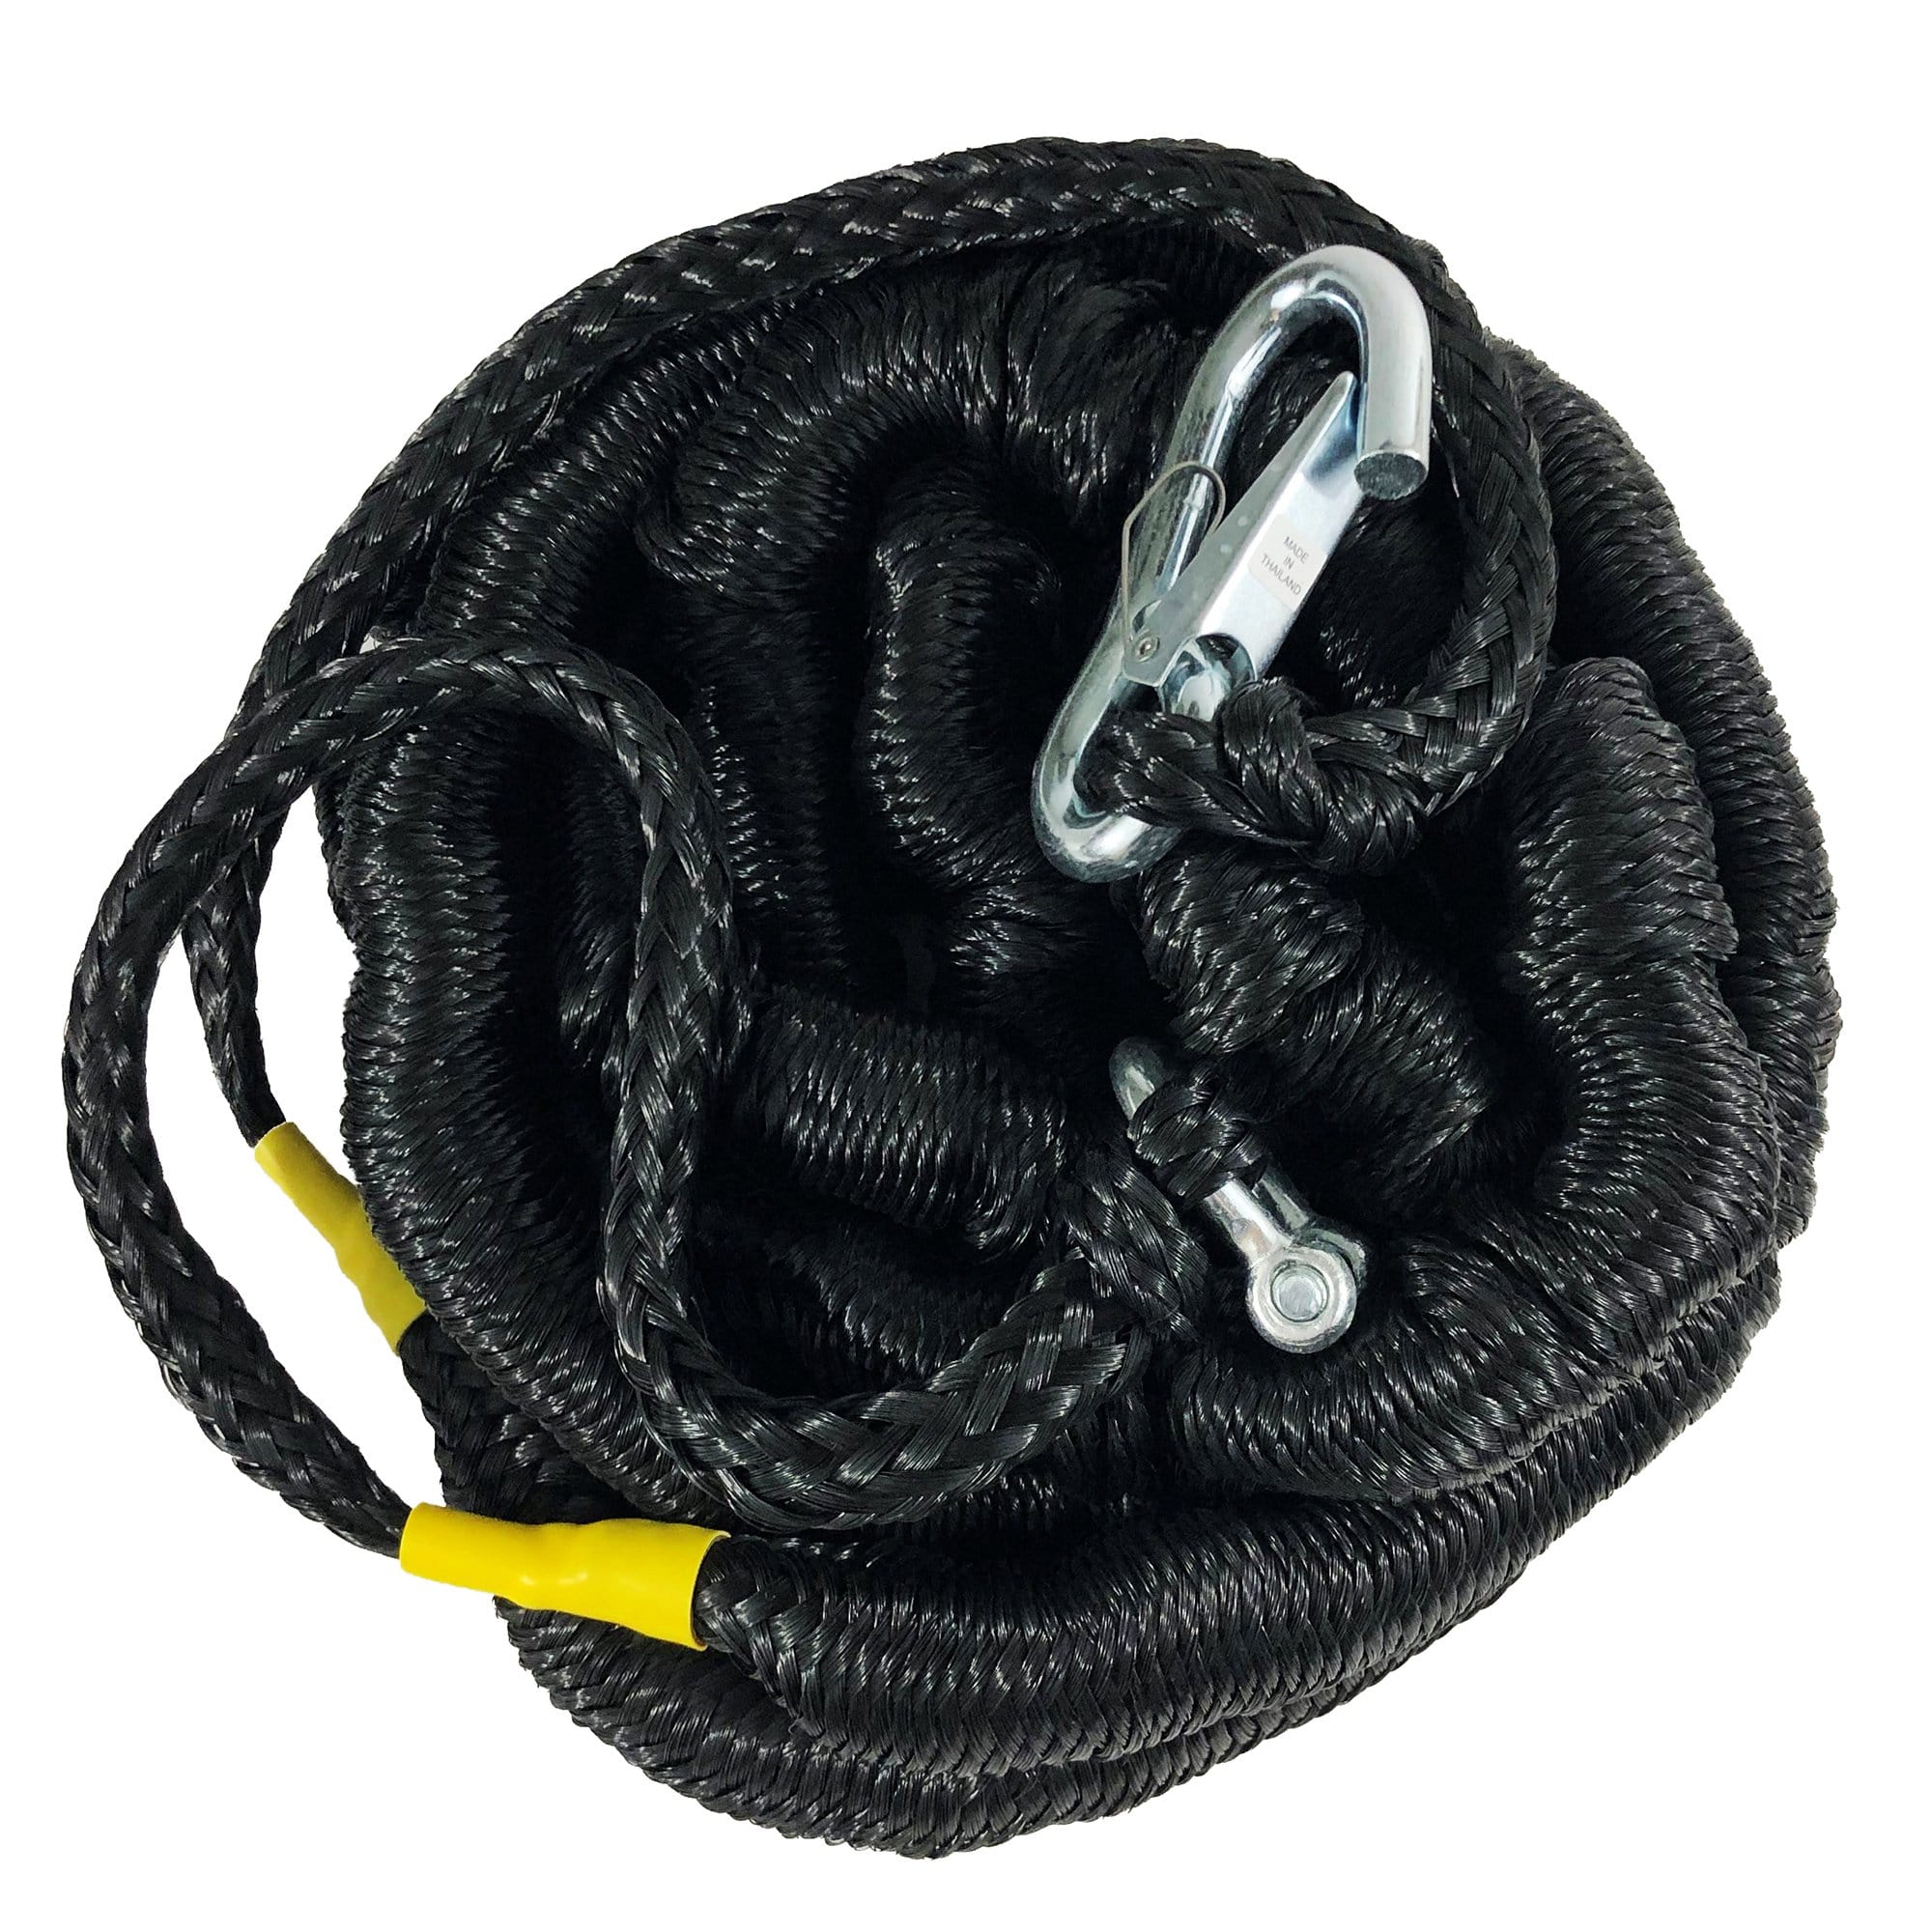 Greenfield Anchor Buddy Dock Bungee Cord, Black